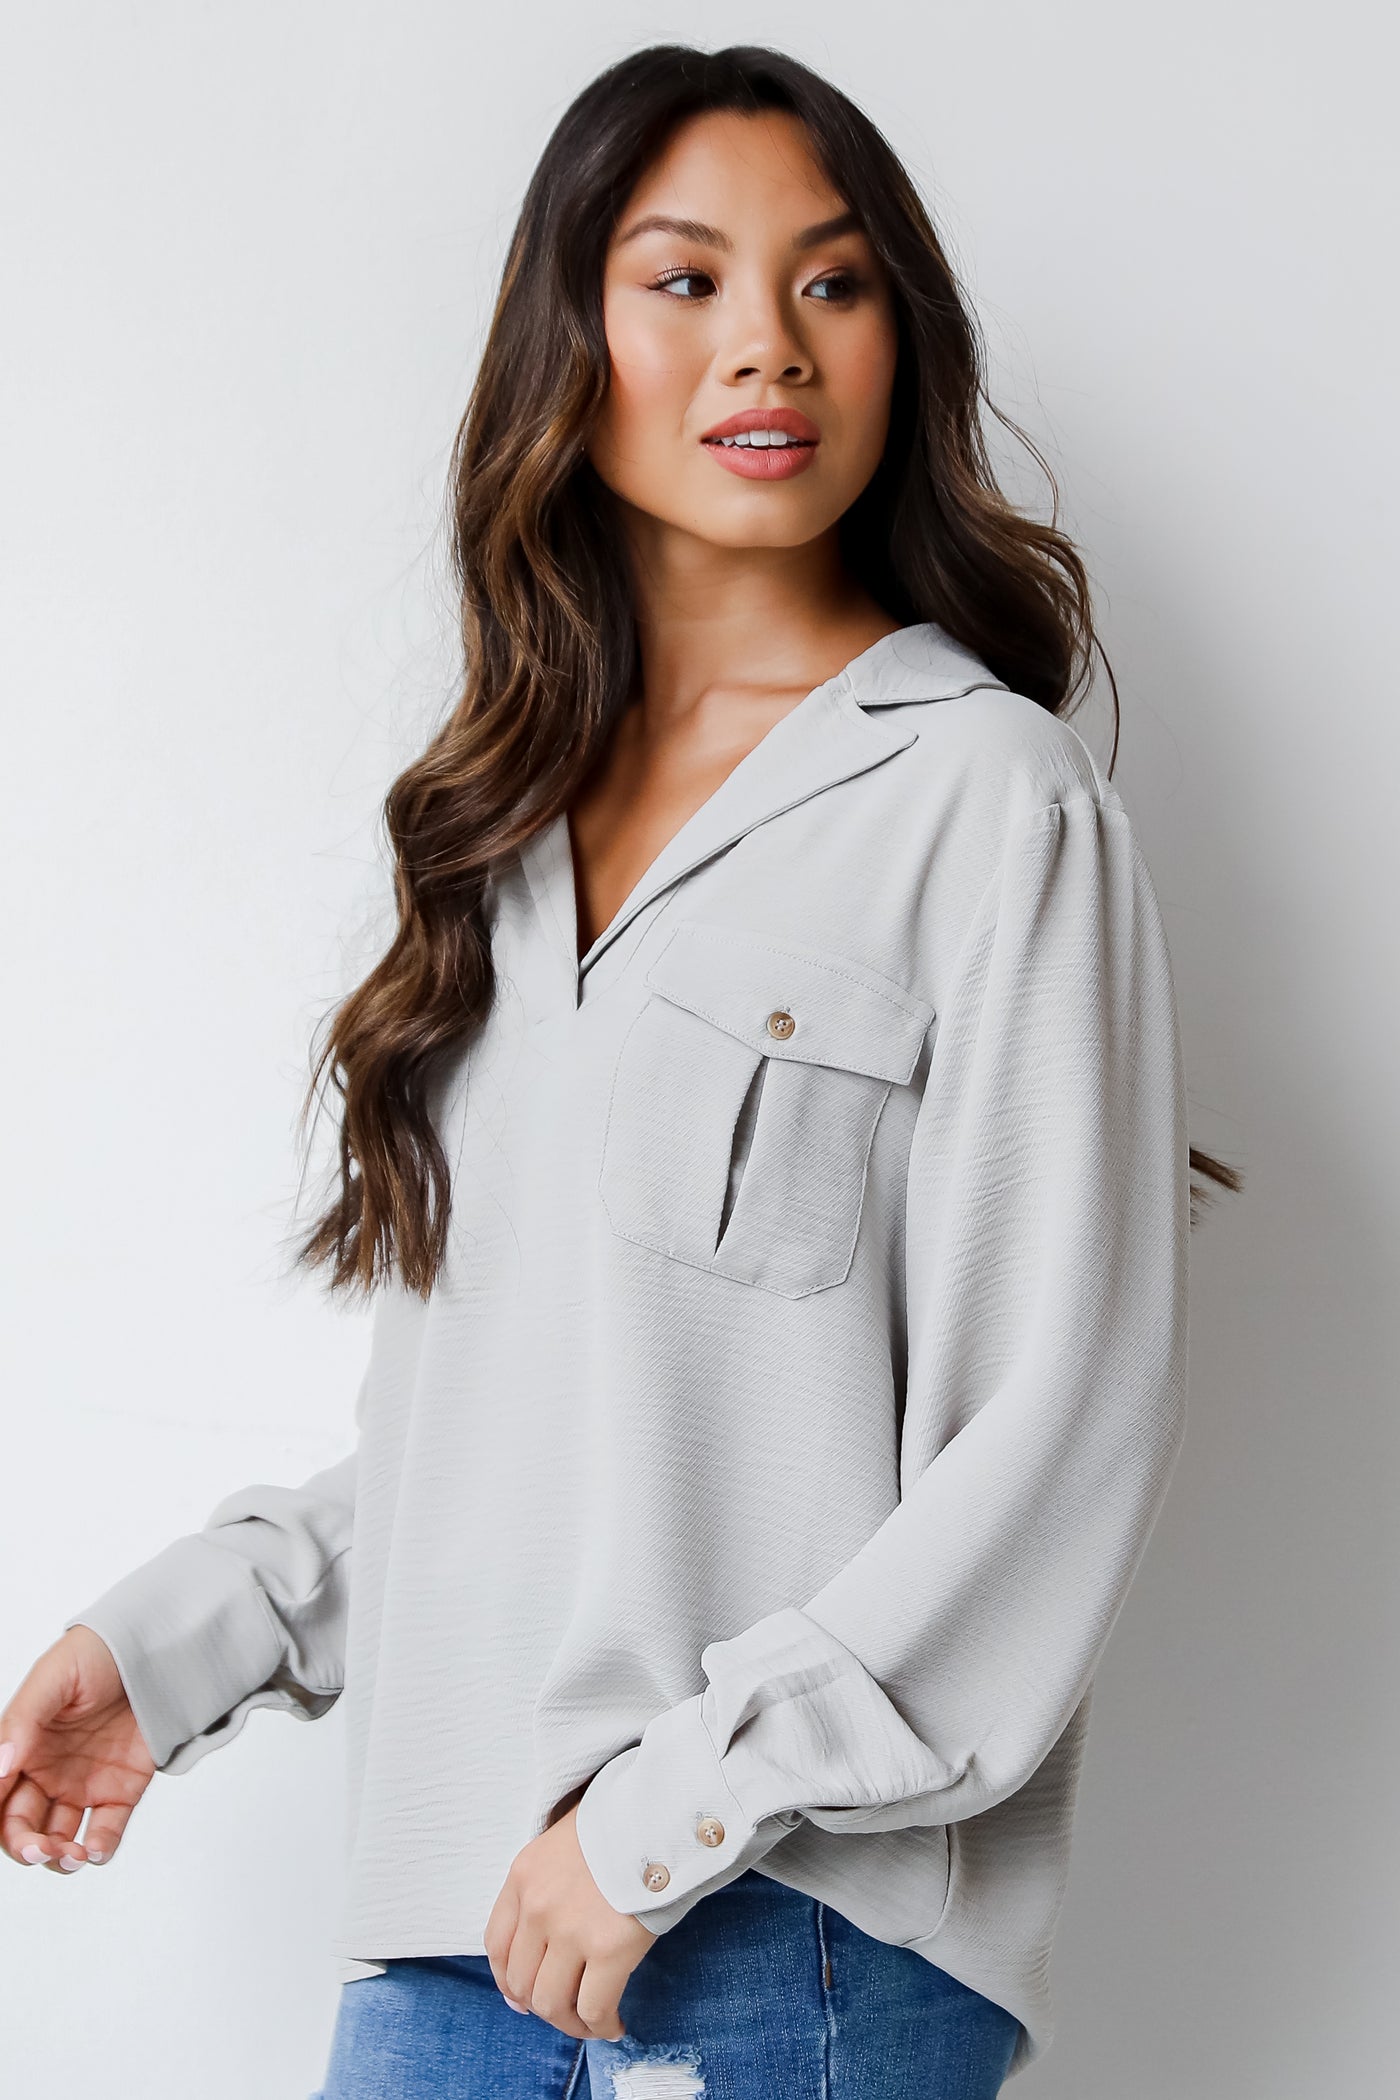 grey collared blouse side view